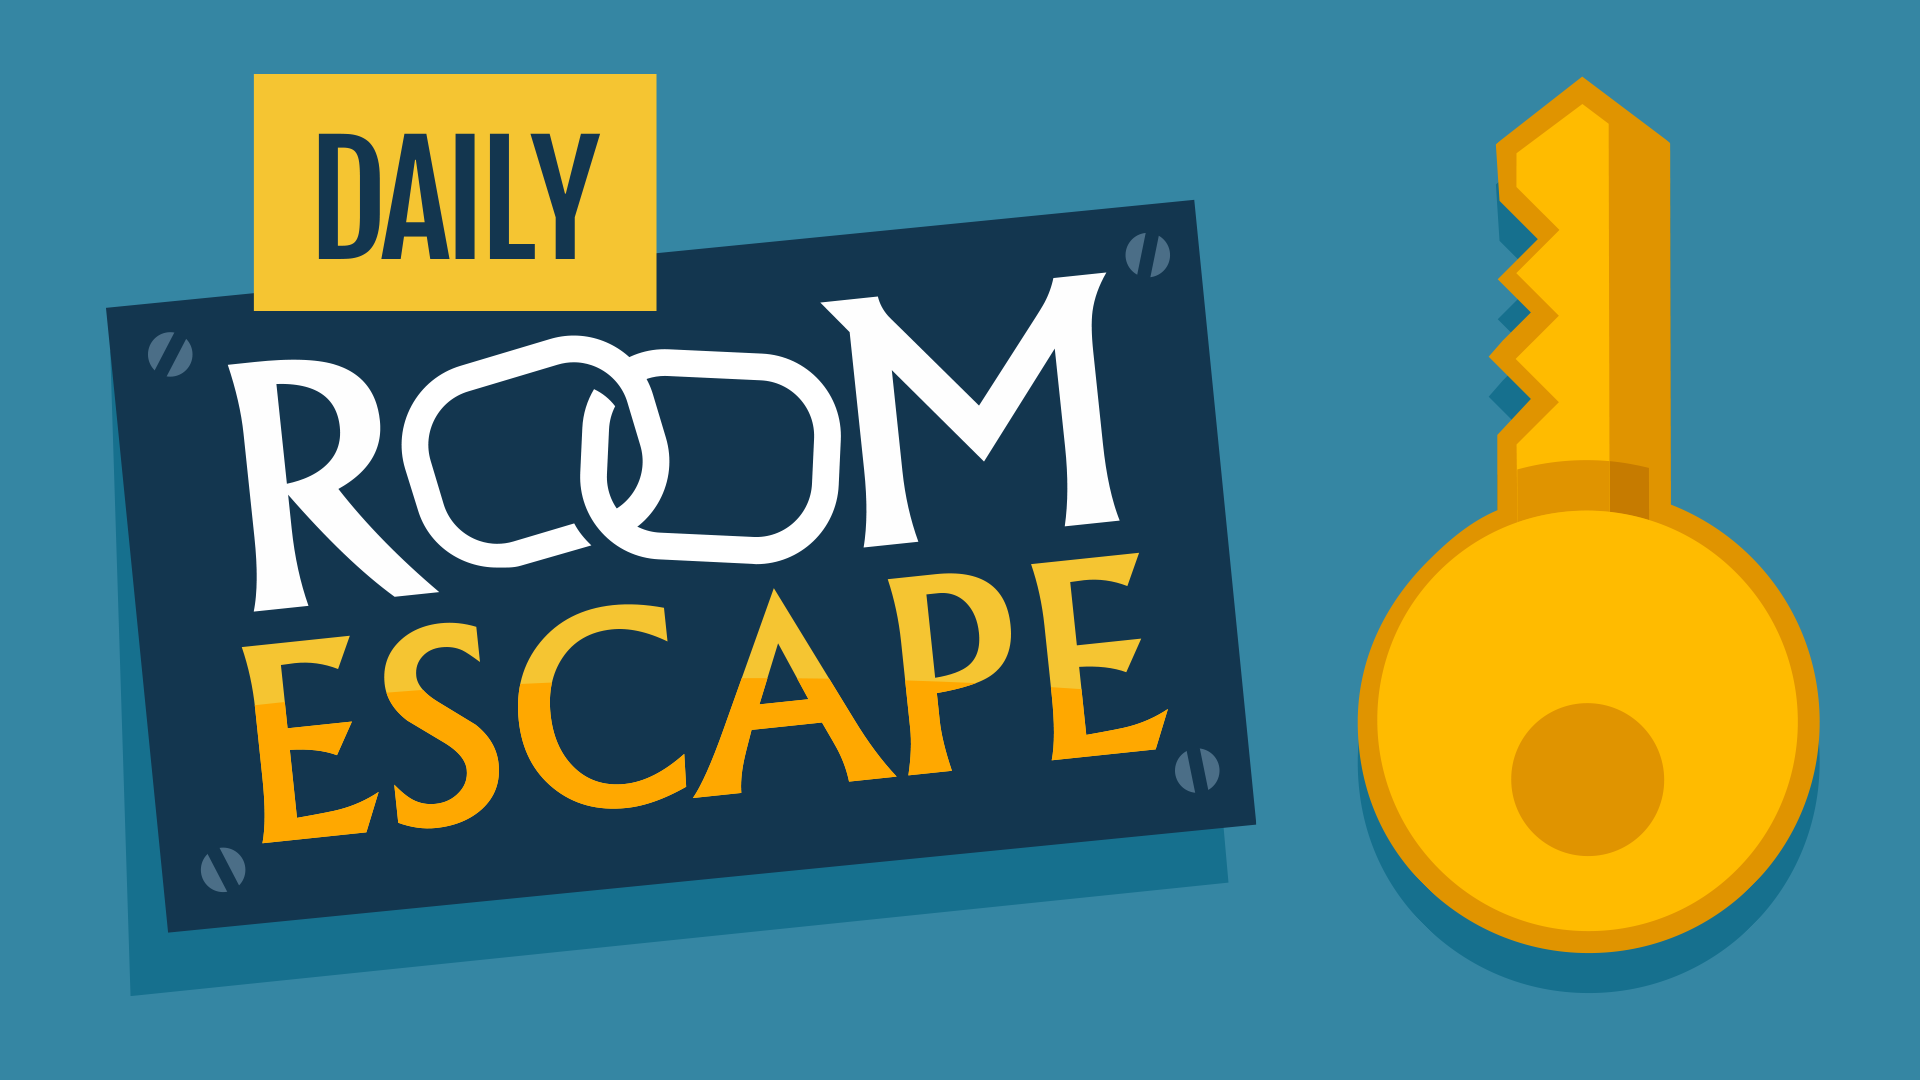 Daily Room Escape Game Image